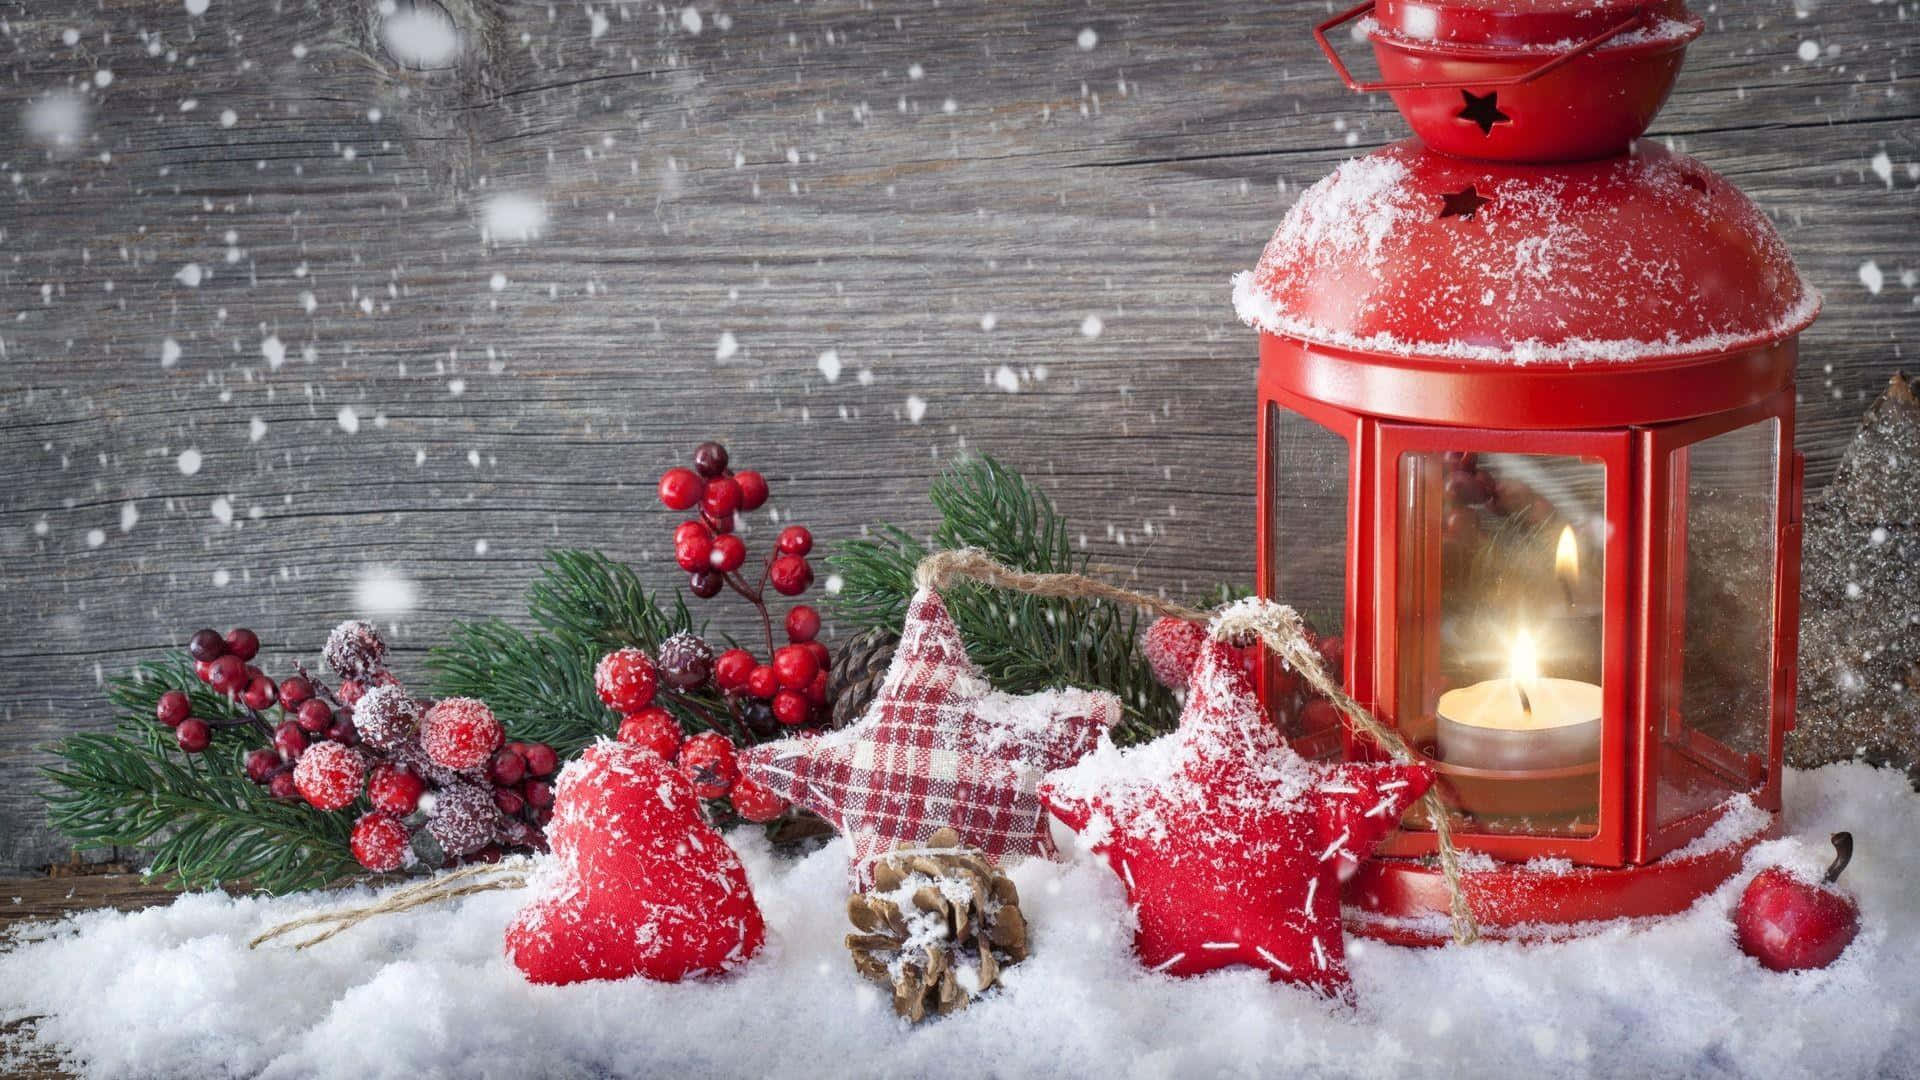 Spread the holiday cheer with a picturesque rustic Christmas